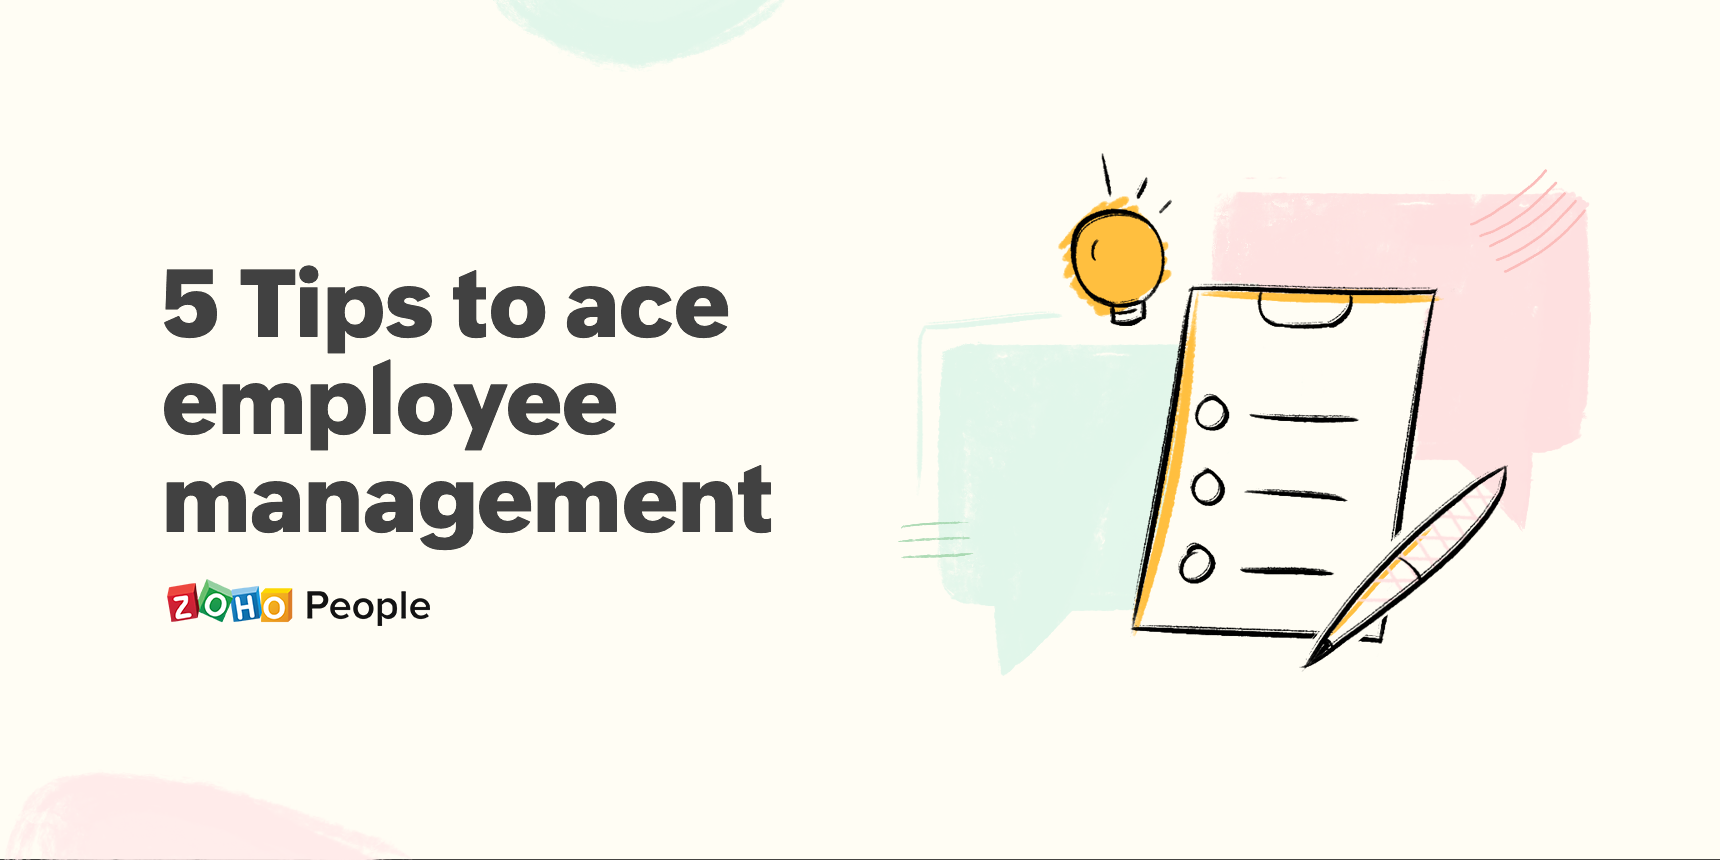 5 tips to build your next employee management strategy